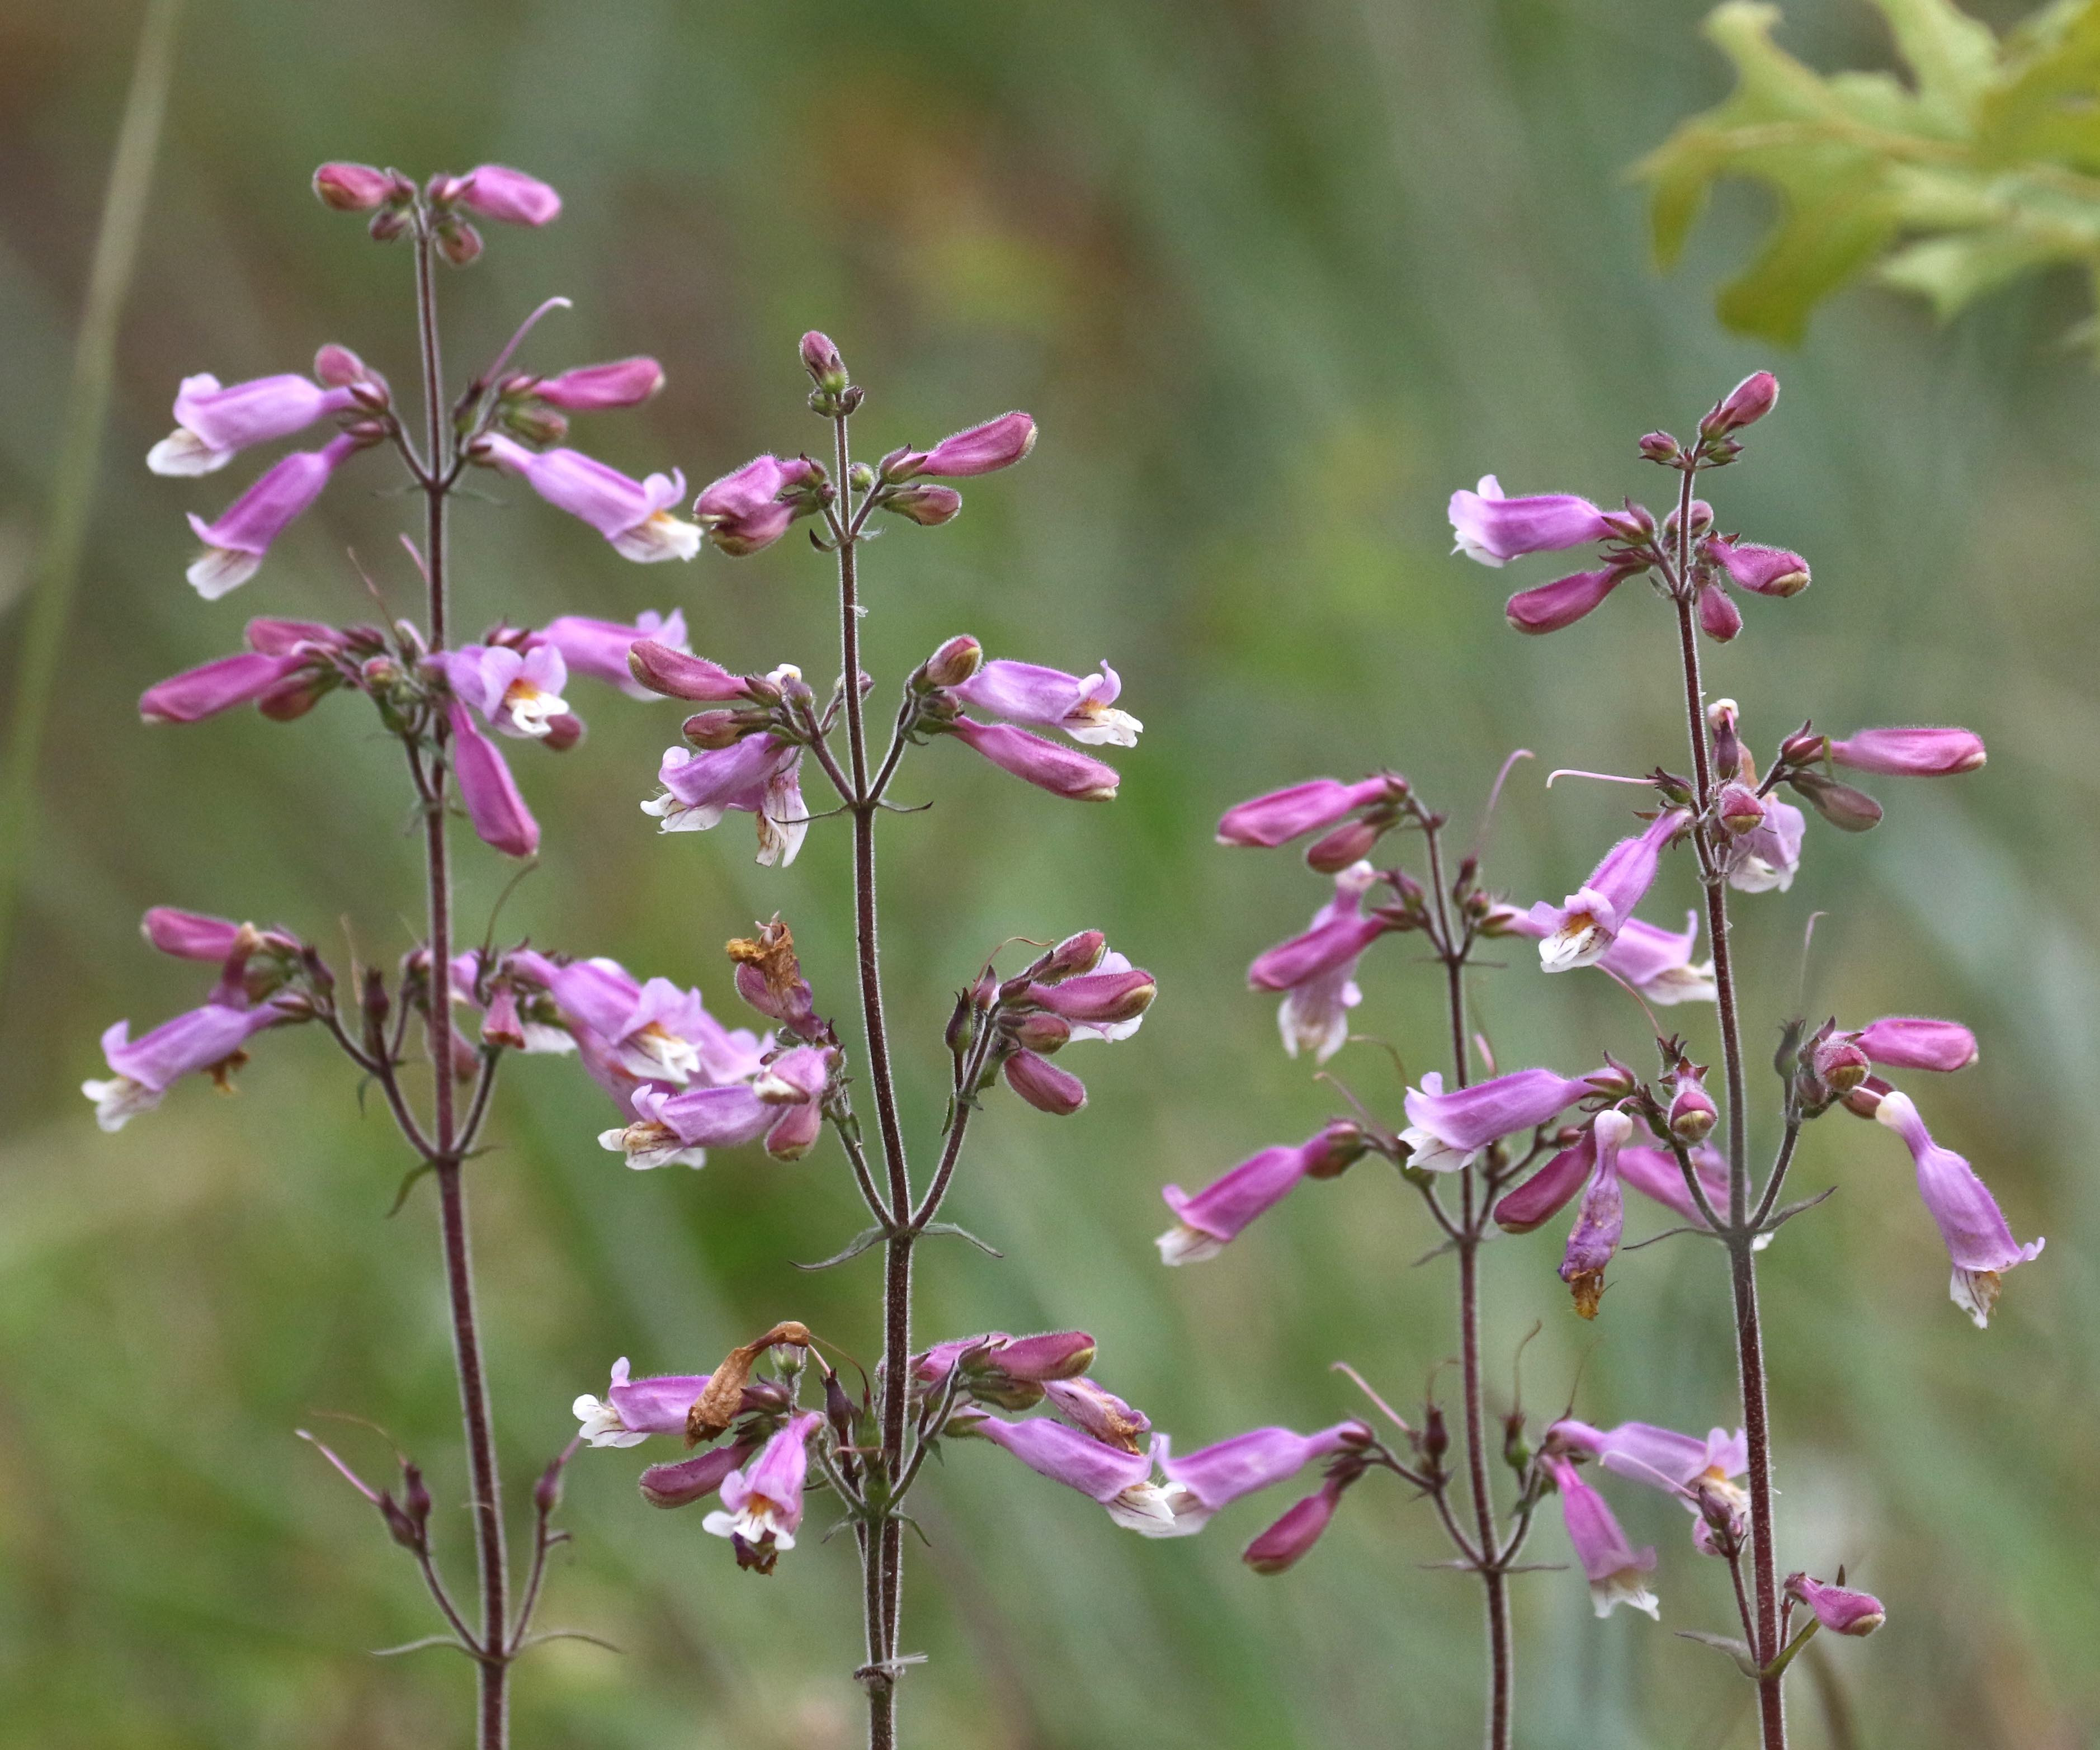 The Scientific Name is Penstemon australis. You will likely hear them called Eustis Lake Beardtongue, Southern Beardtongue, Sandhill Beardtongue. This picture shows the Flowers grow in slender, loose panicles.  Stems and slender opposite leaves are covered with fine hair. of Penstemon australis